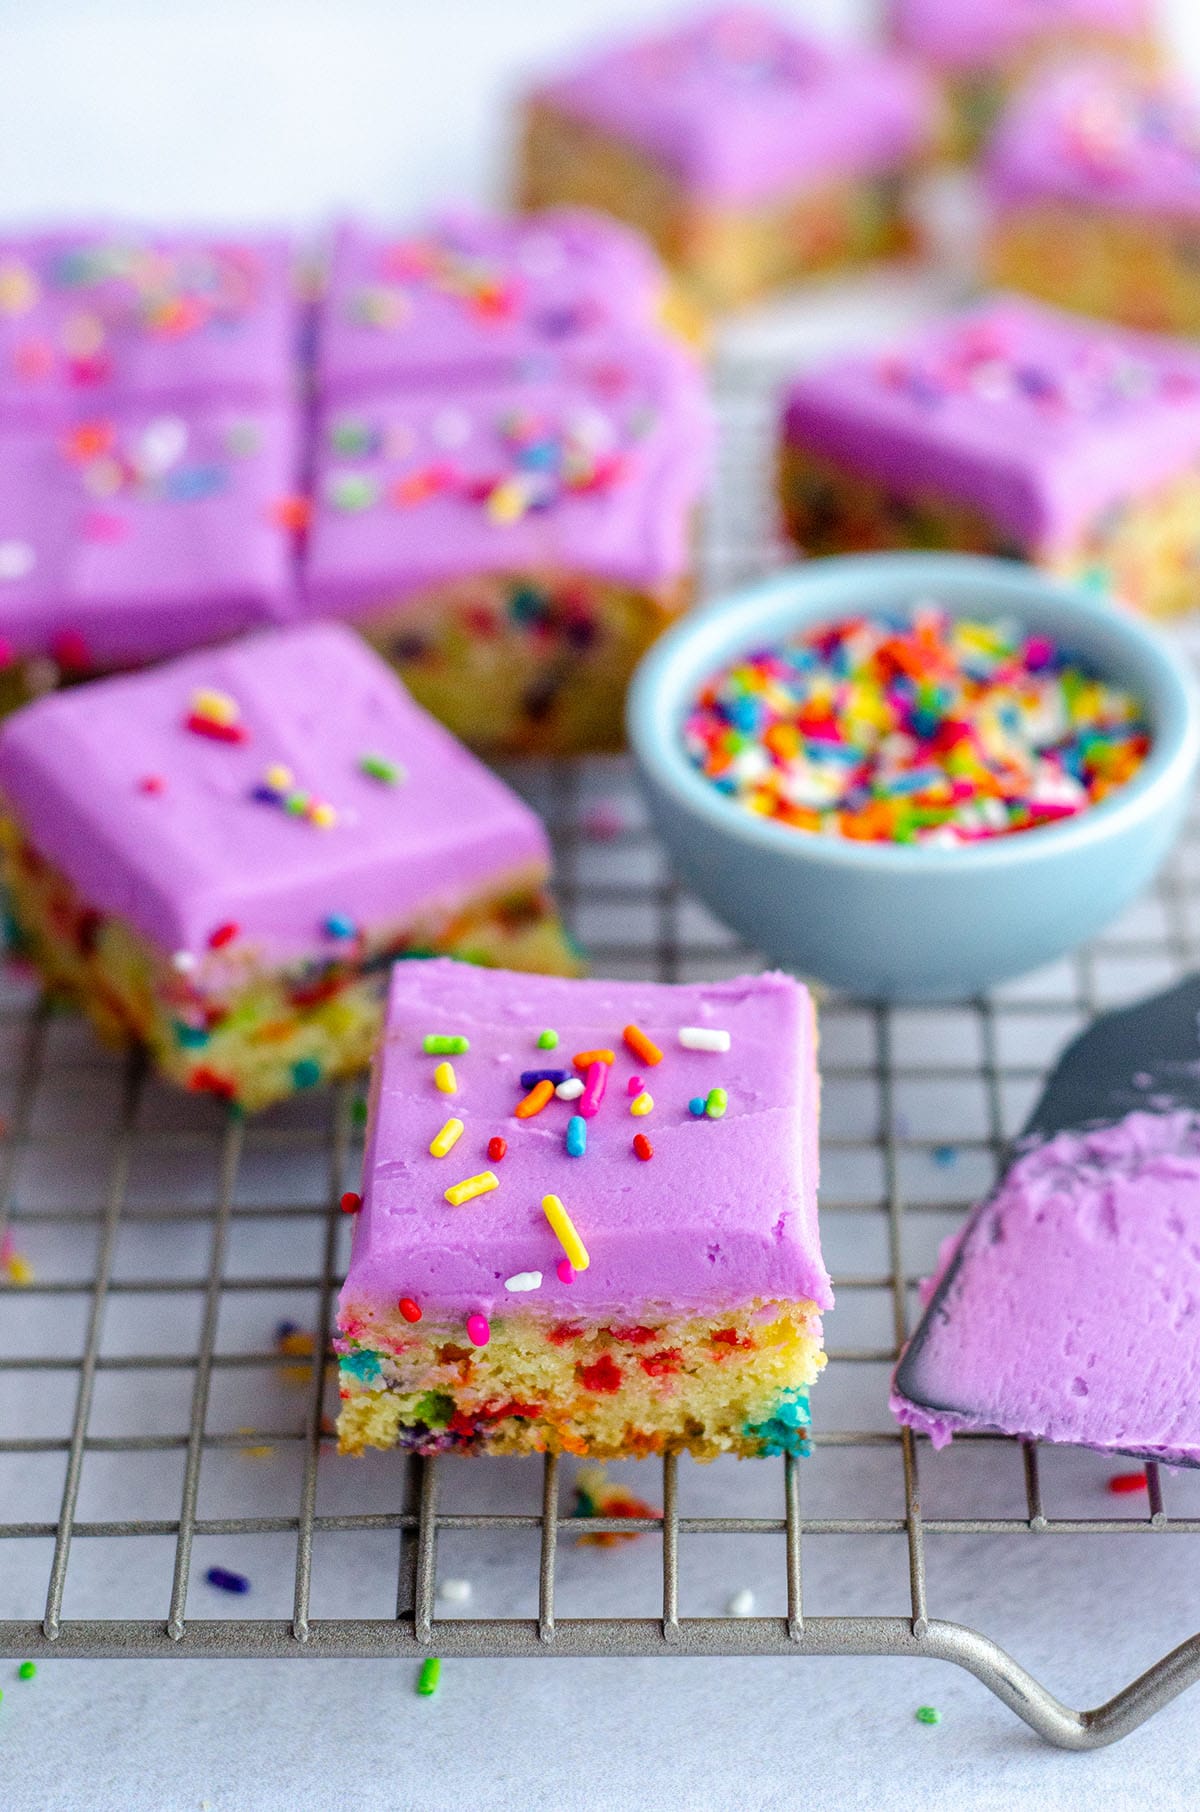 Sugar Cookie Bars: Soft and buttery sugar cookies in easy-to-serve bar form. Top with a colorful buttercream and rainbow sprinkles for an extra pop of color!